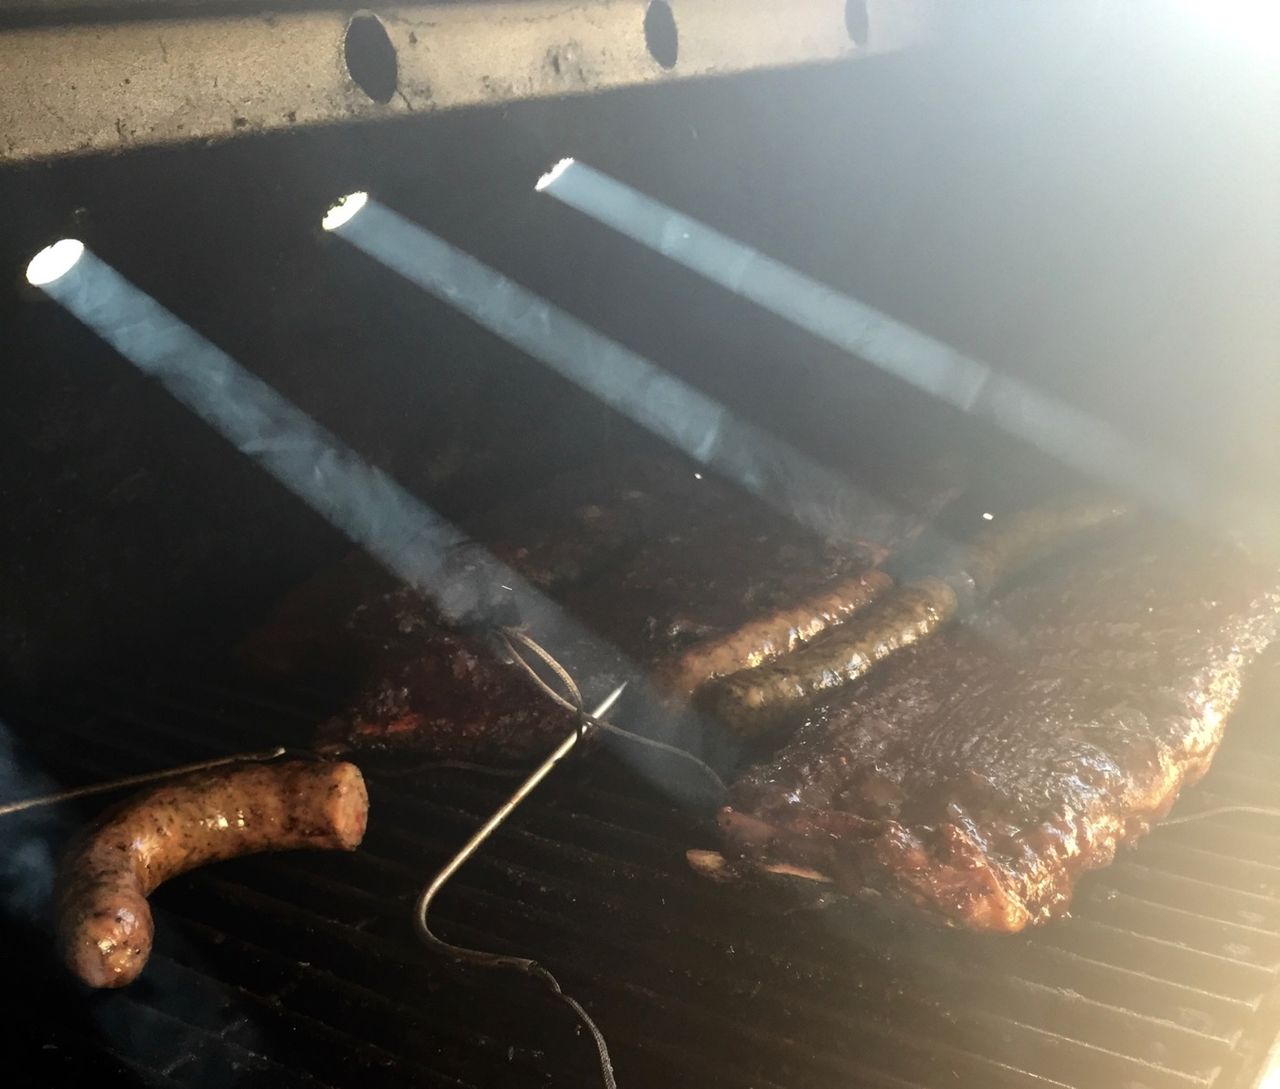 Smokey air with rays of sunlight soming through holes in the smoker.